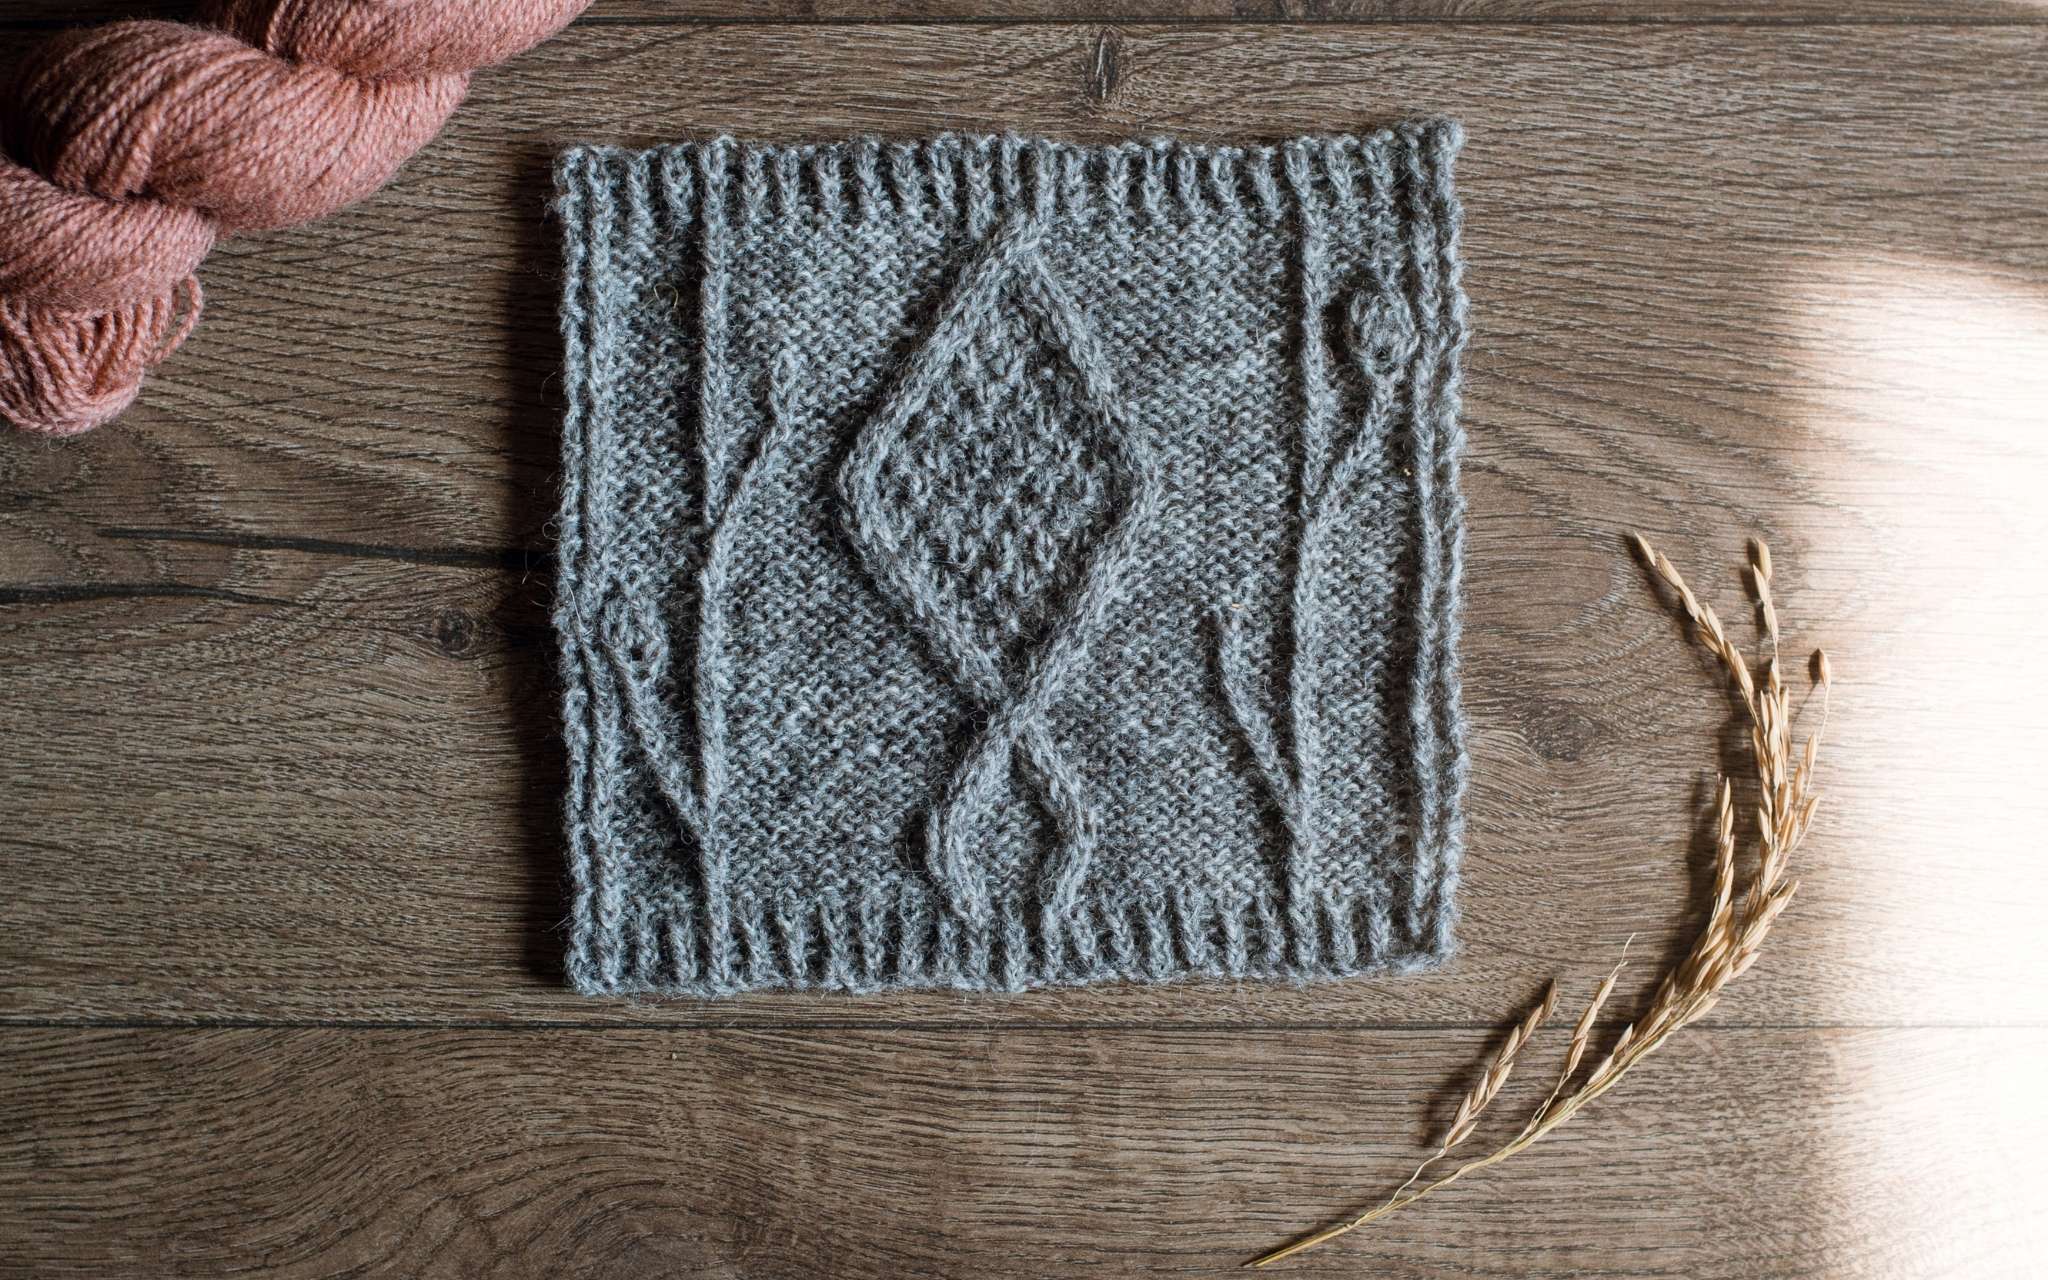 A swatch of cabled knitting in grey laid flat on a wooden surface. There are some dried stems, scissors and a bottle of pints to the side.